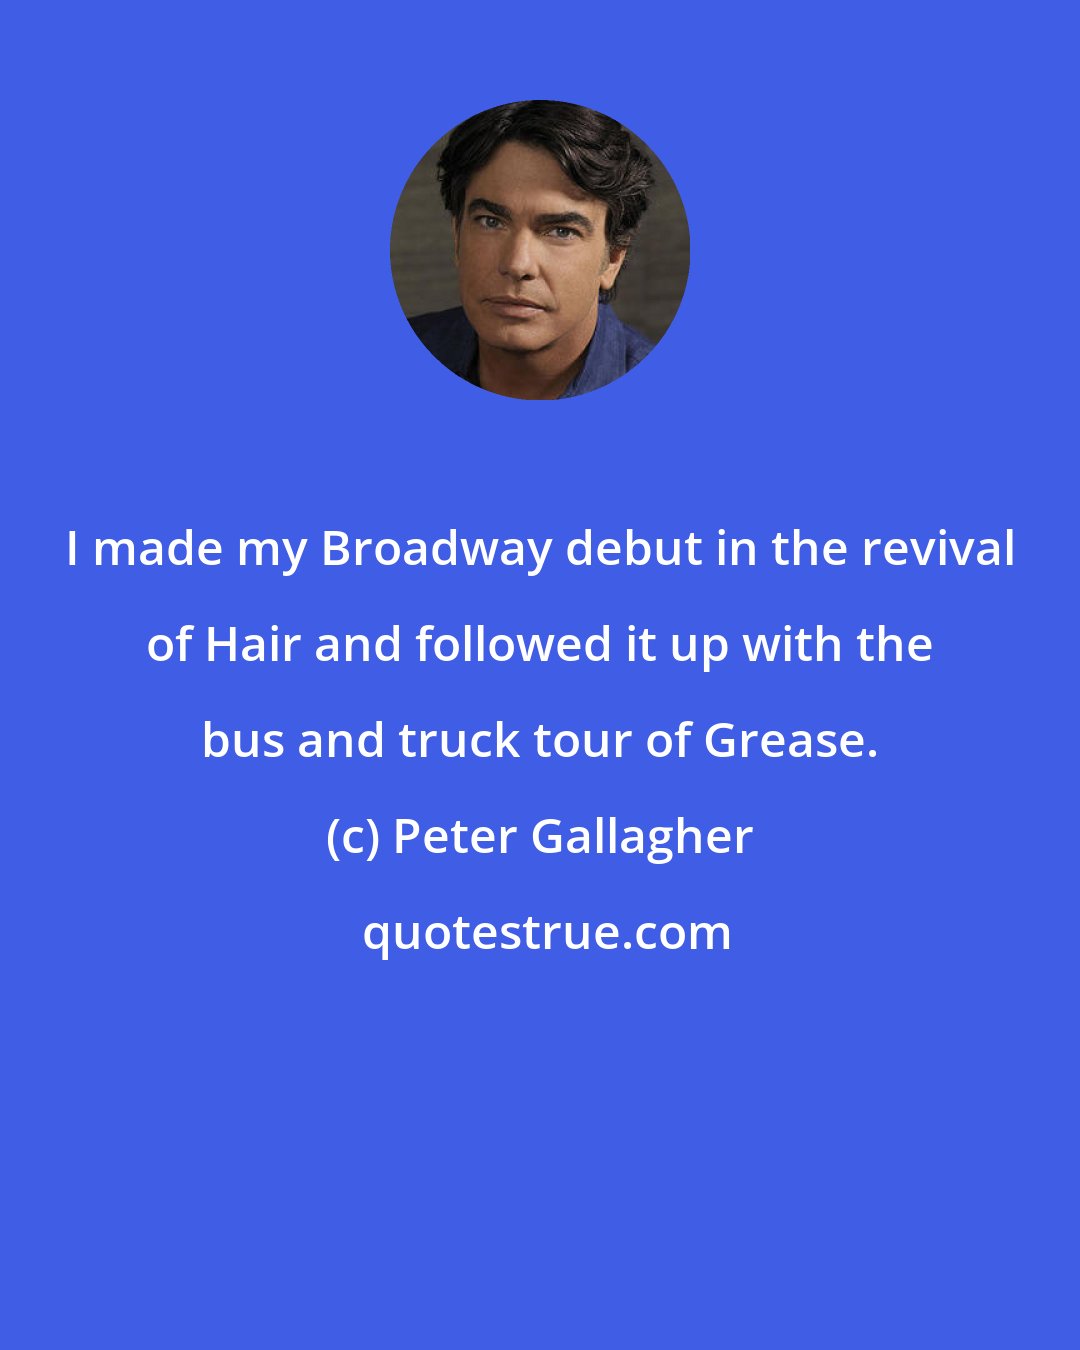 Peter Gallagher: I made my Broadway debut in the revival of Hair and followed it up with the bus and truck tour of Grease.